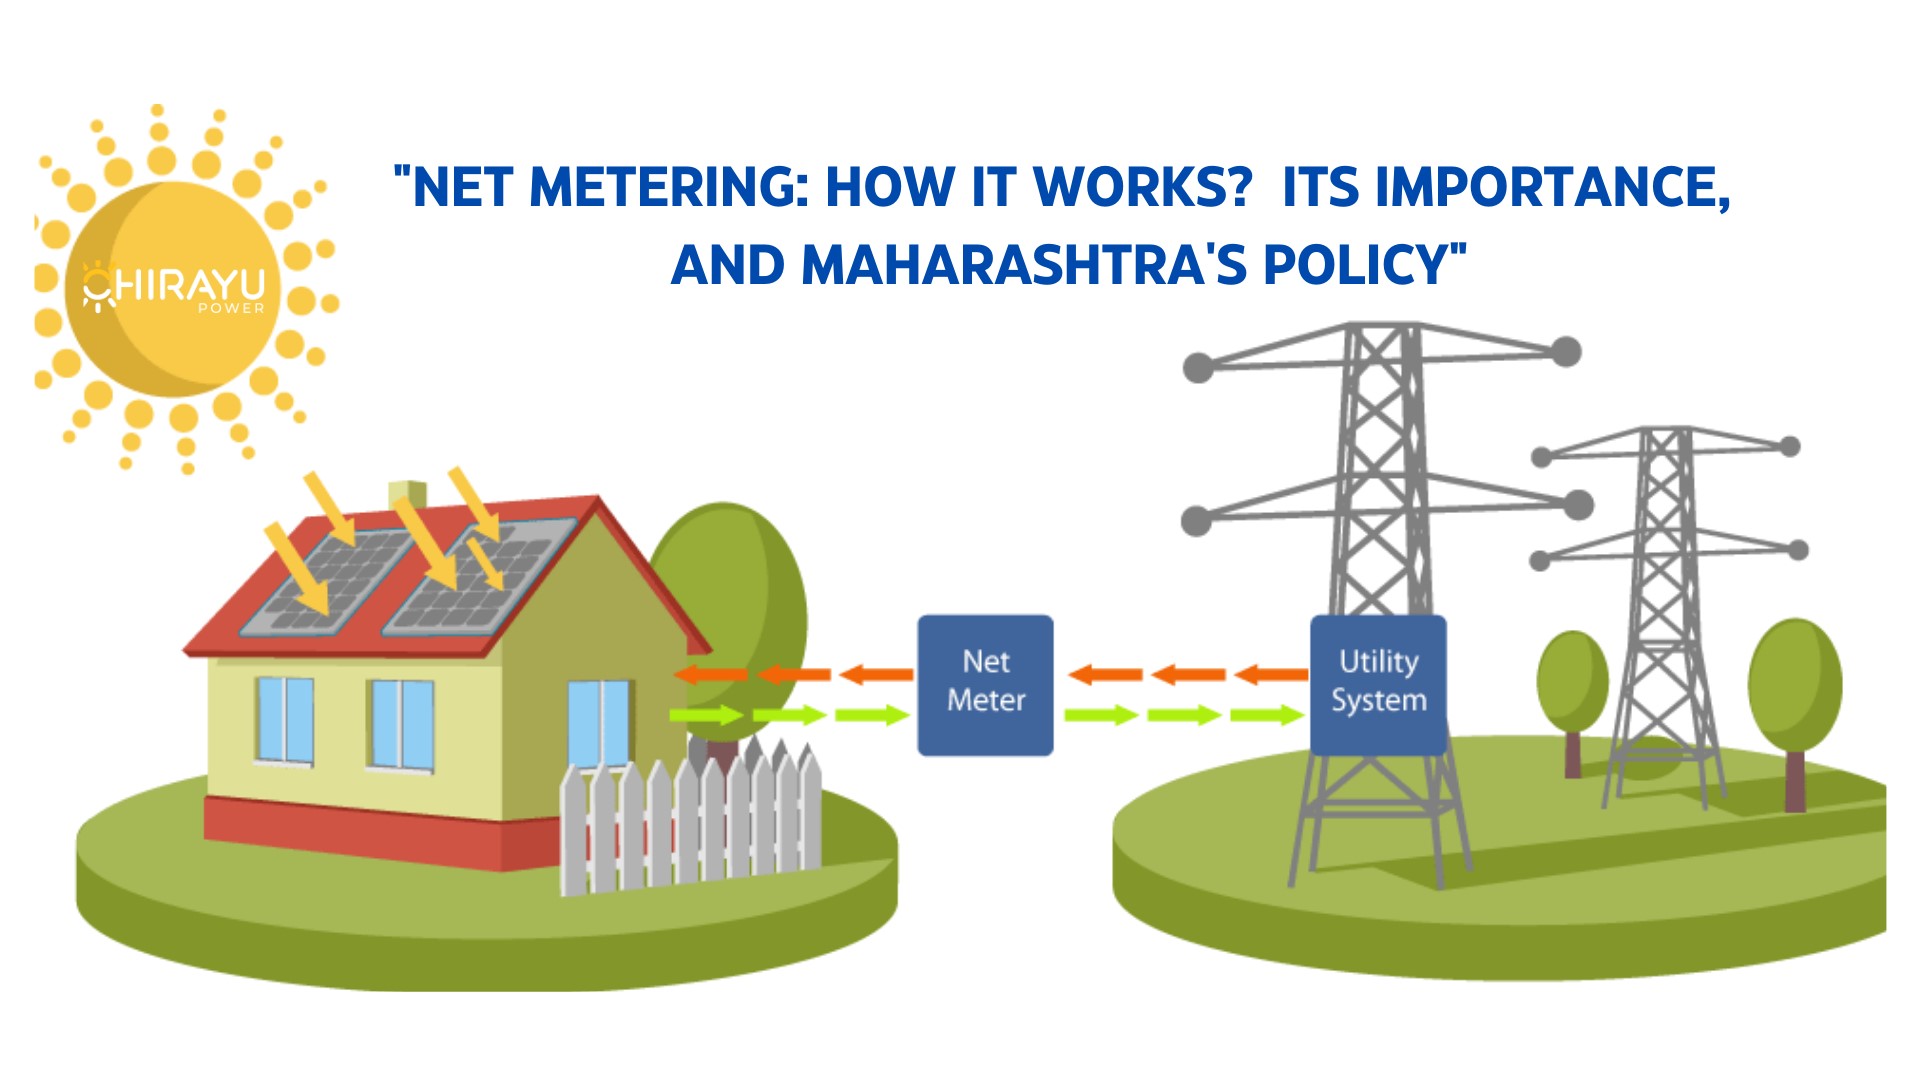 NET METERING: HOW IT WORKS, ITS IMPORTANCE AND MAHARASHTRA'S POLICY